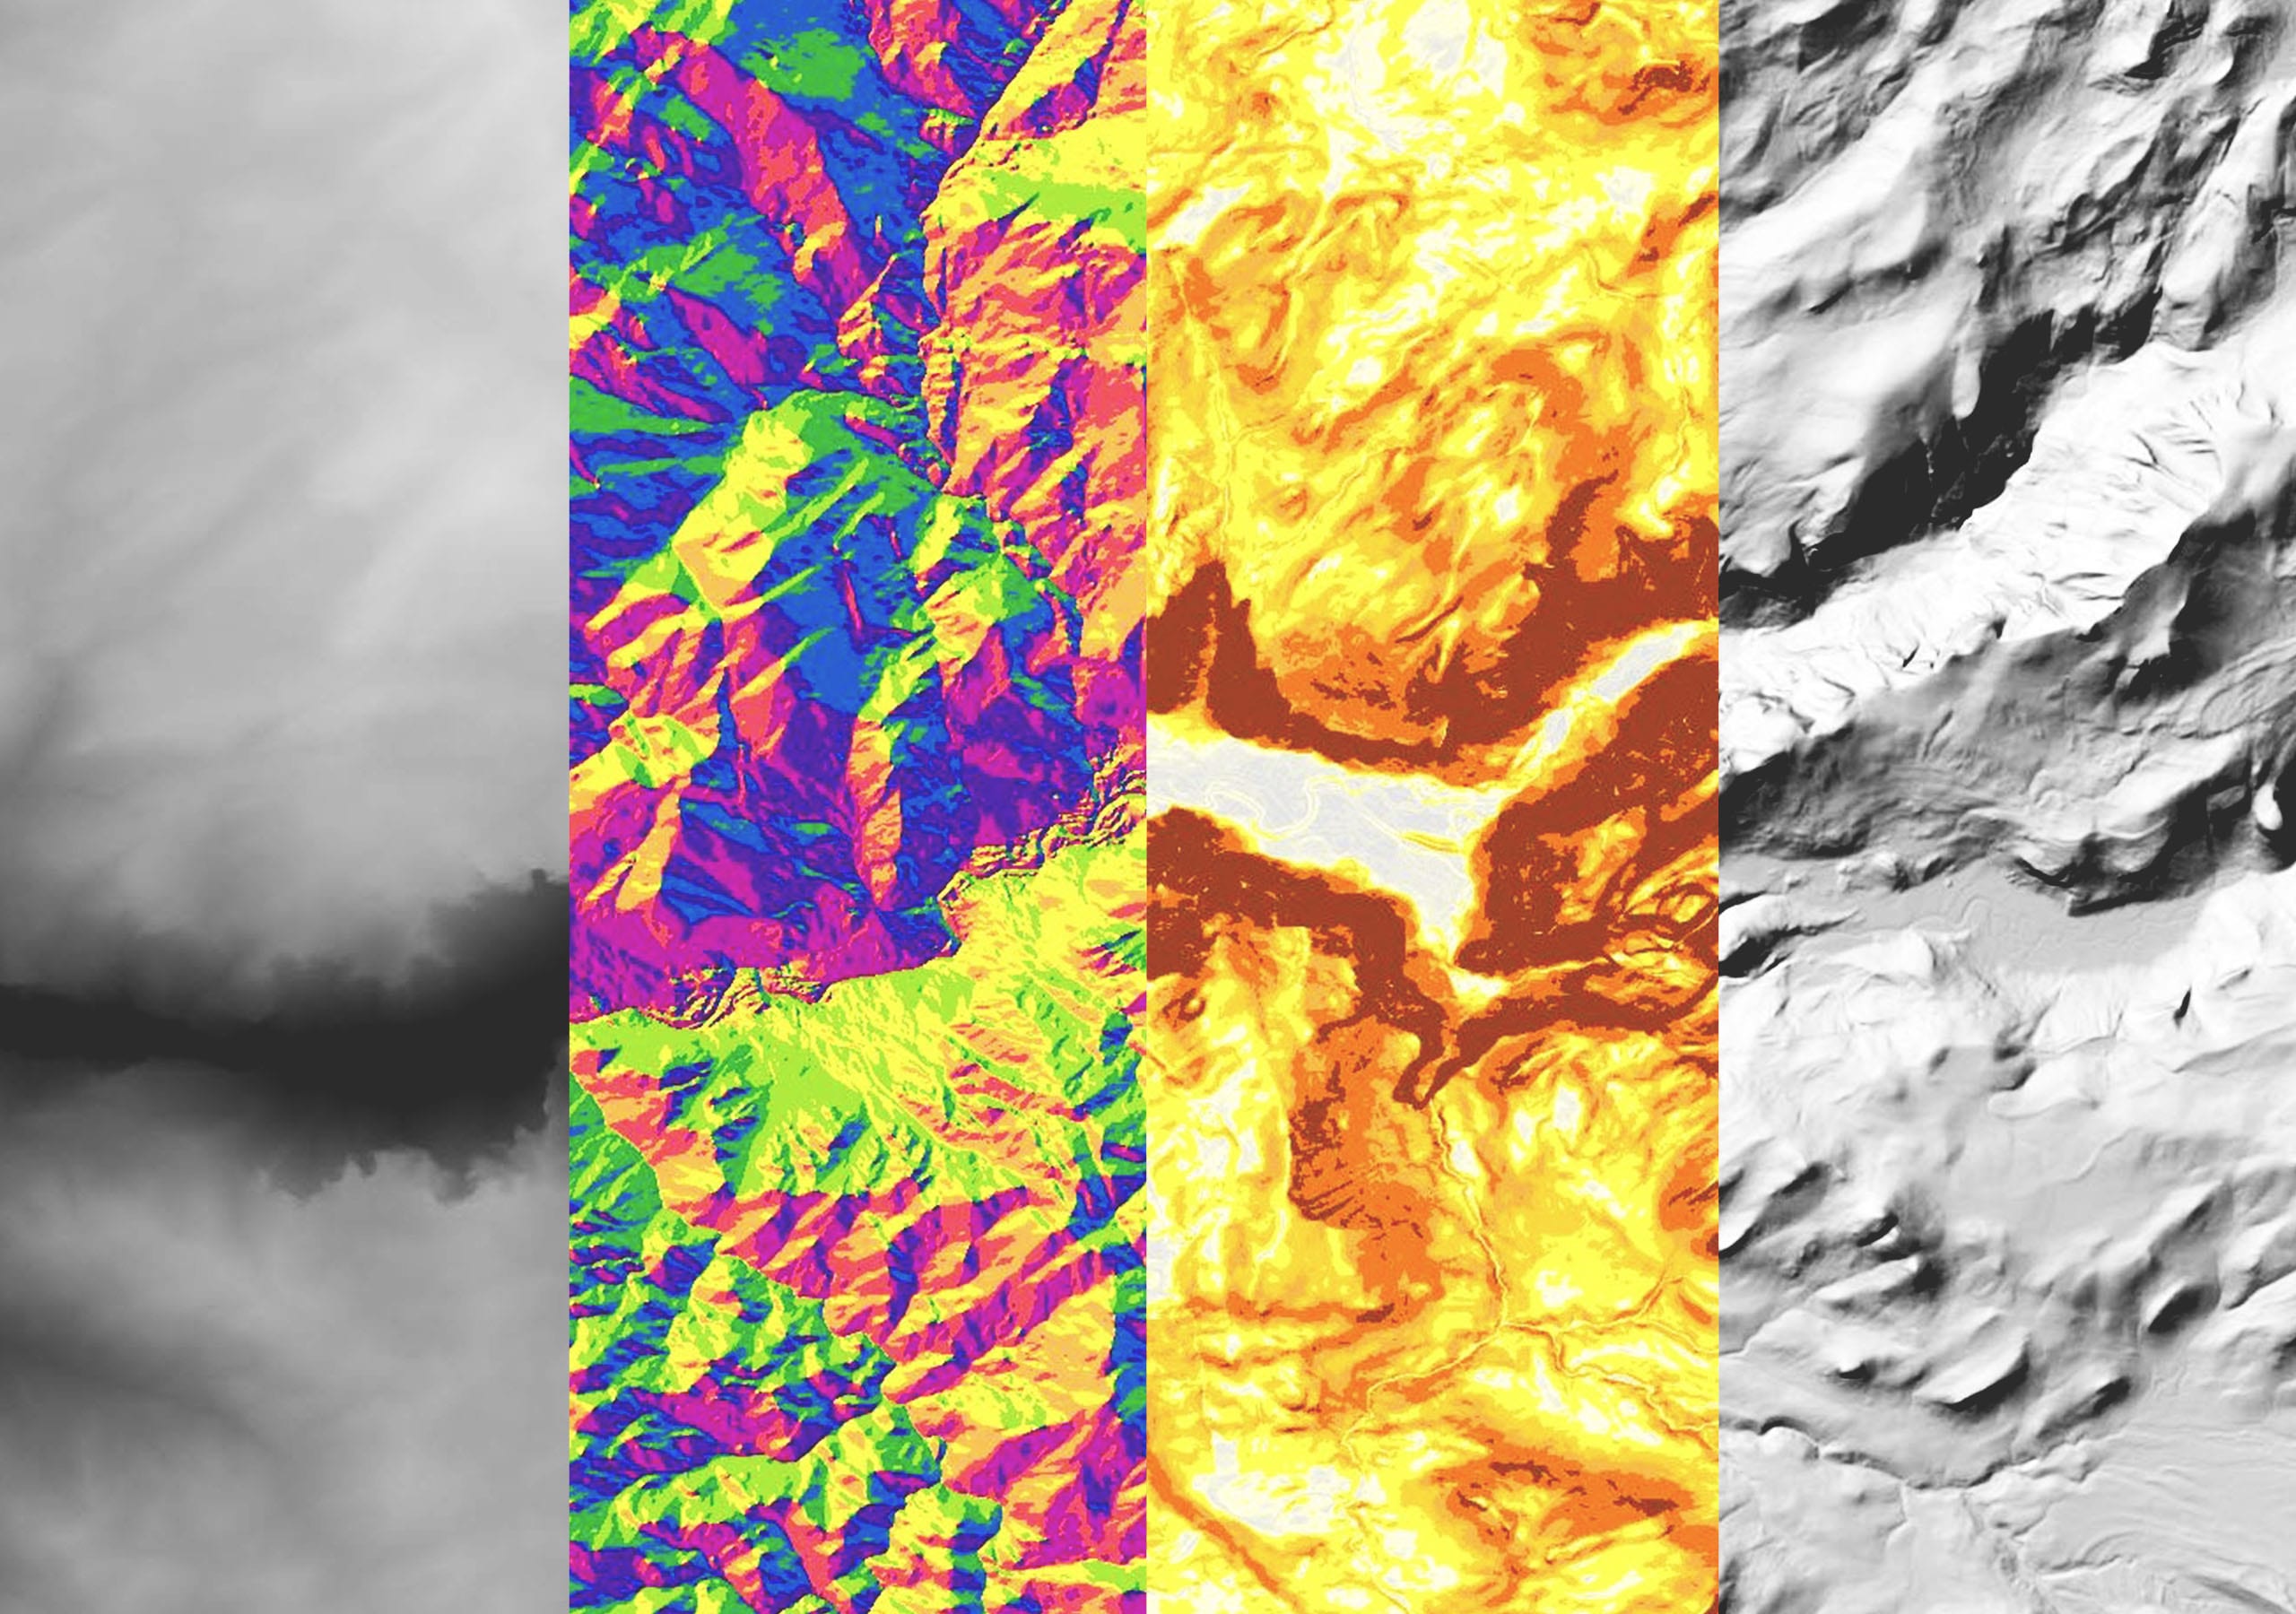 Four panels show the same remote sensing image with different colorways showing multiple interpretations of the sensor data